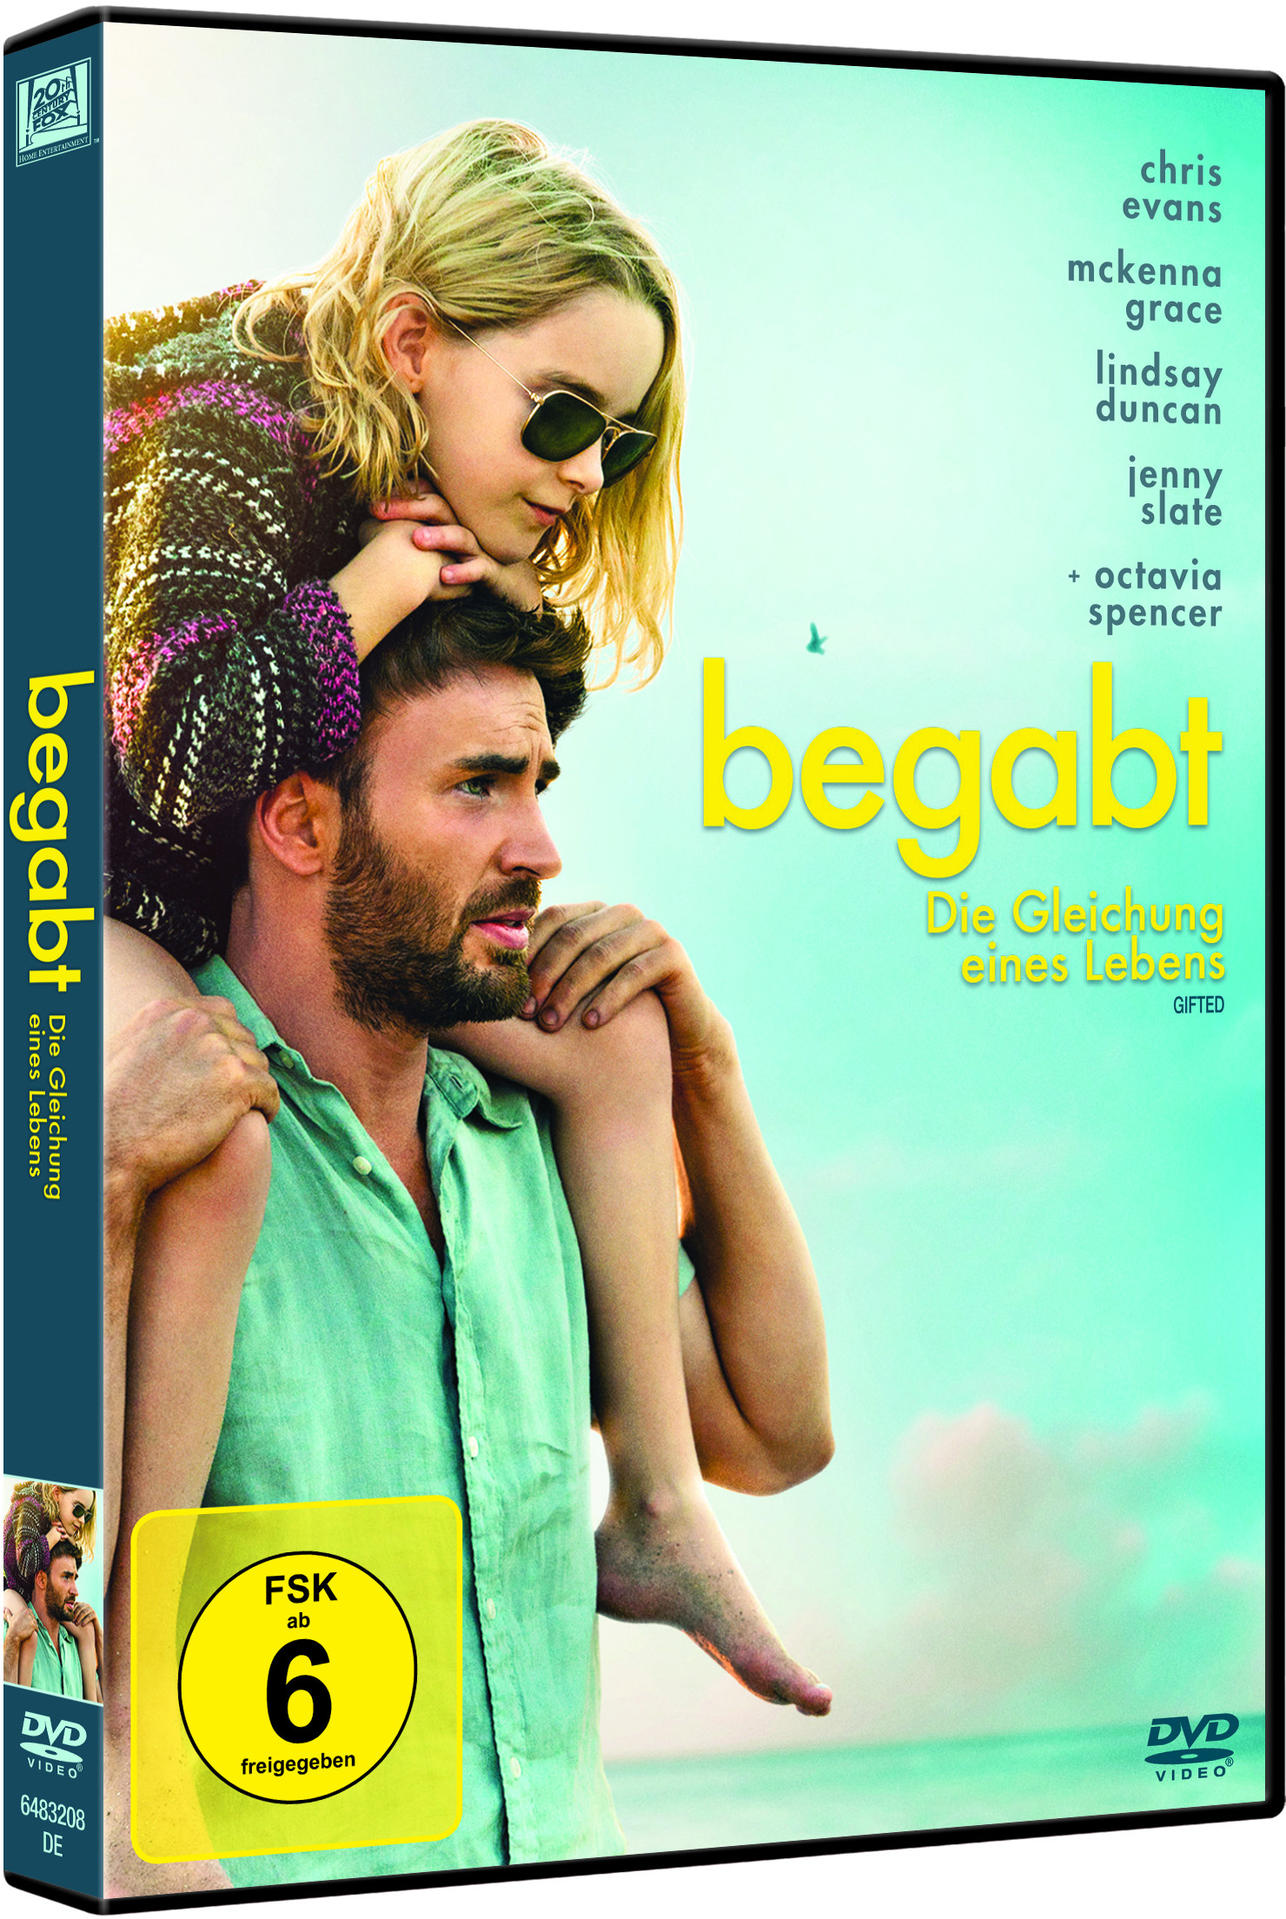 BEGABT-GIFTED DVD